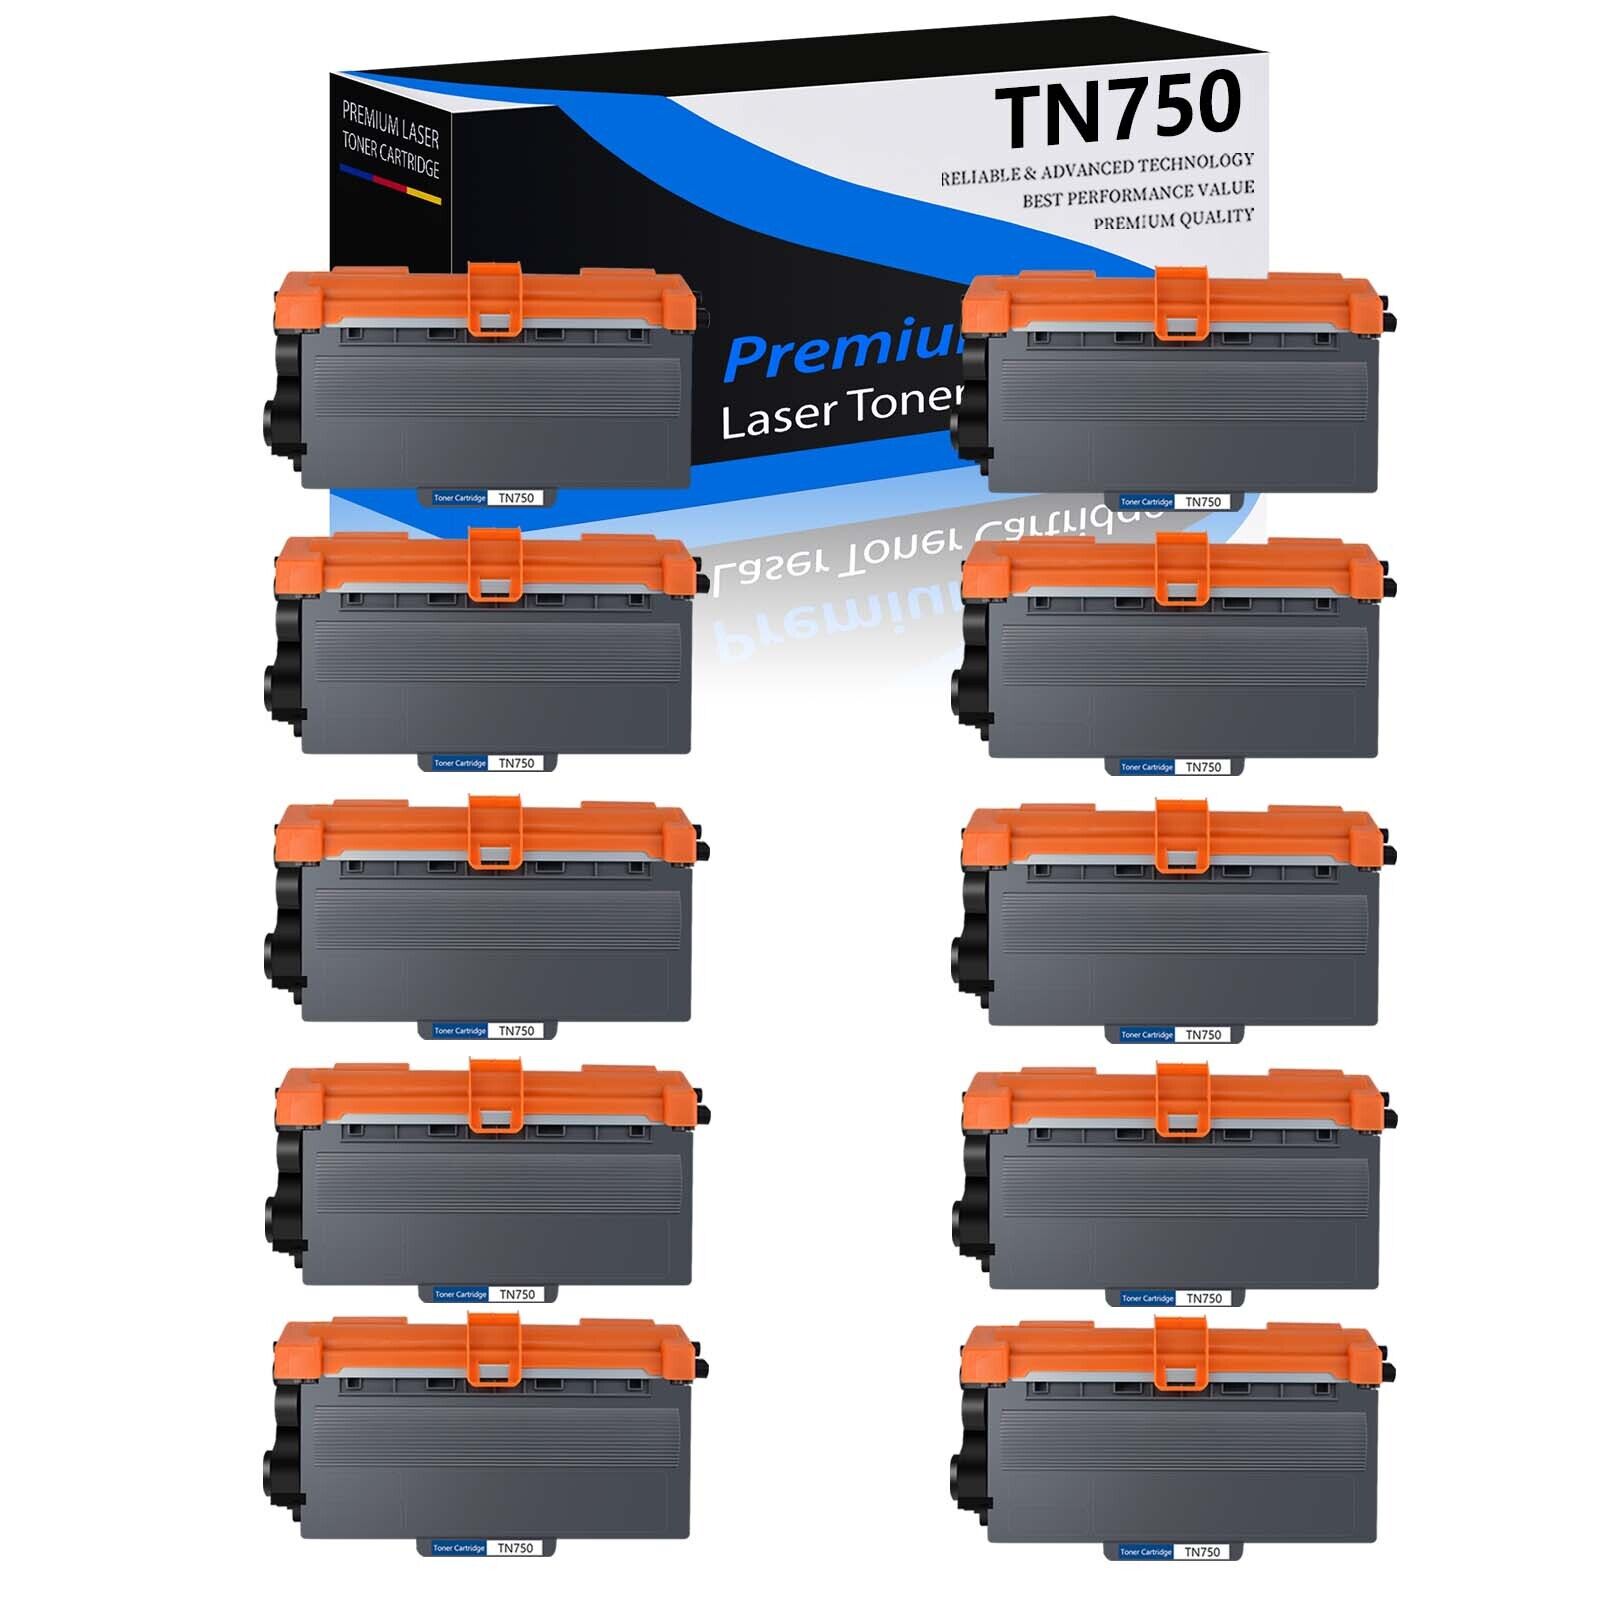 10PK High Yield TN750 TN720 Toner Cartridge for Brother MFC-8710DW MFC-8910DW